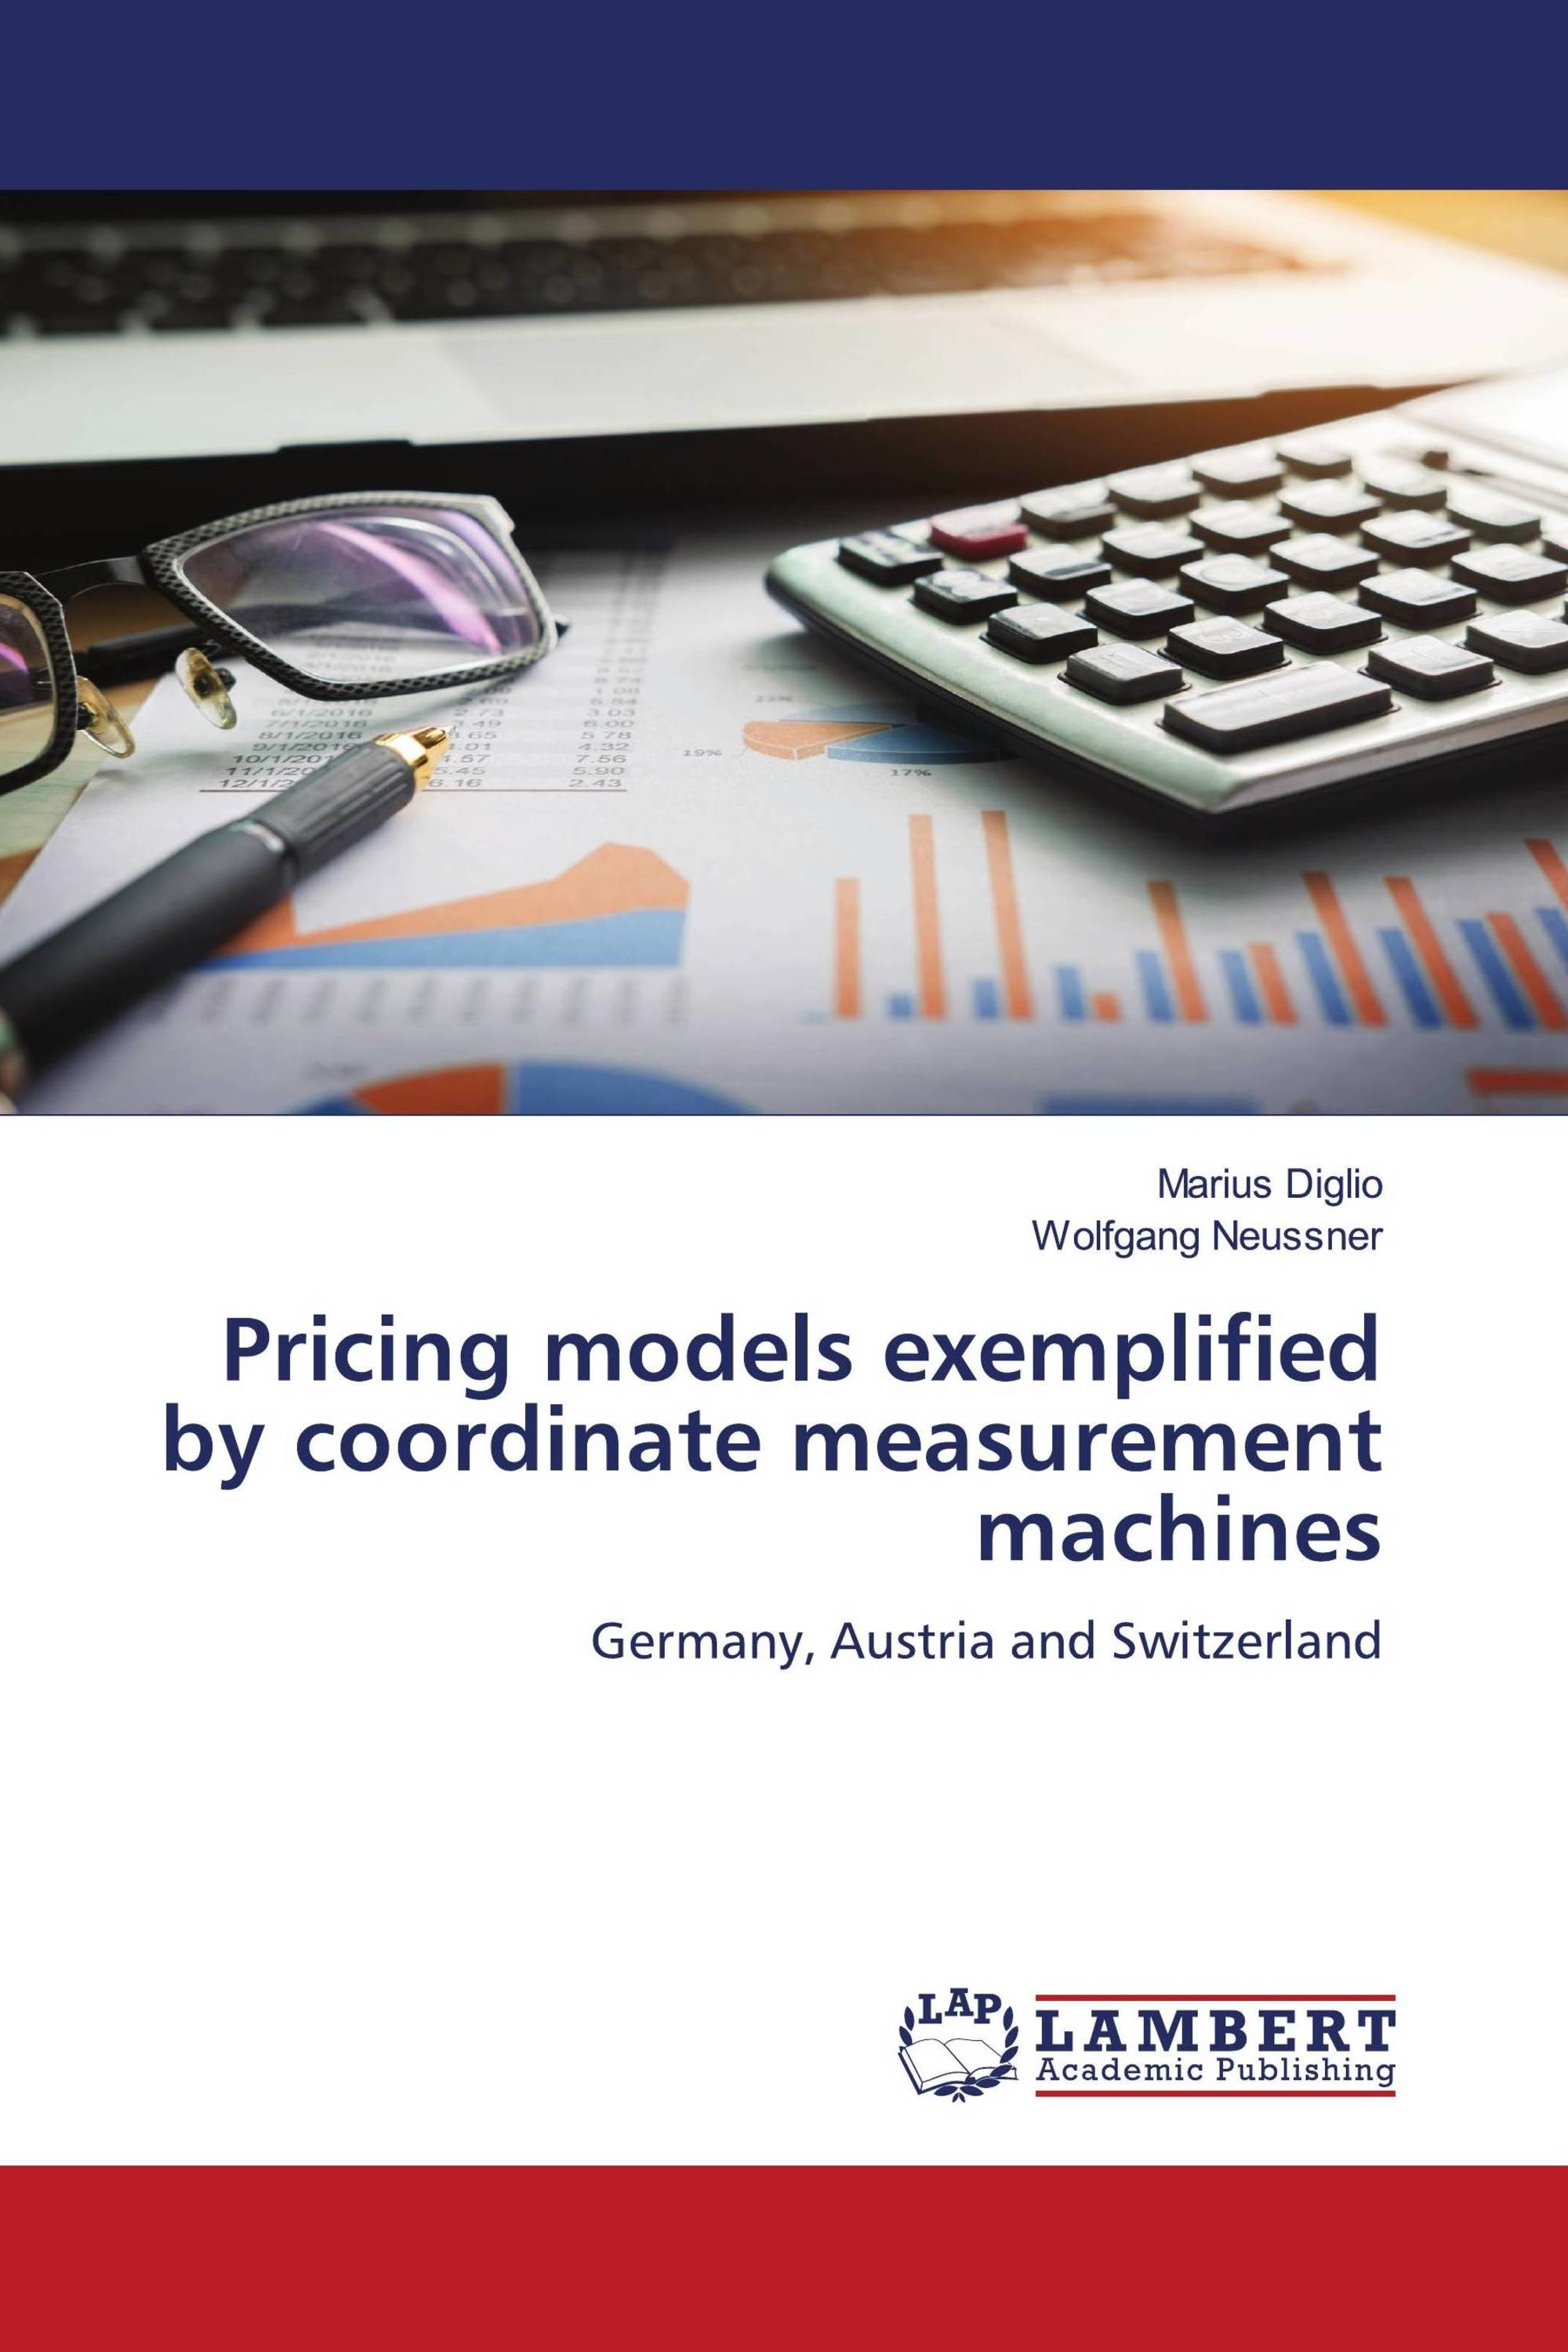 Pricing models exemplified by coordinate measurement machines